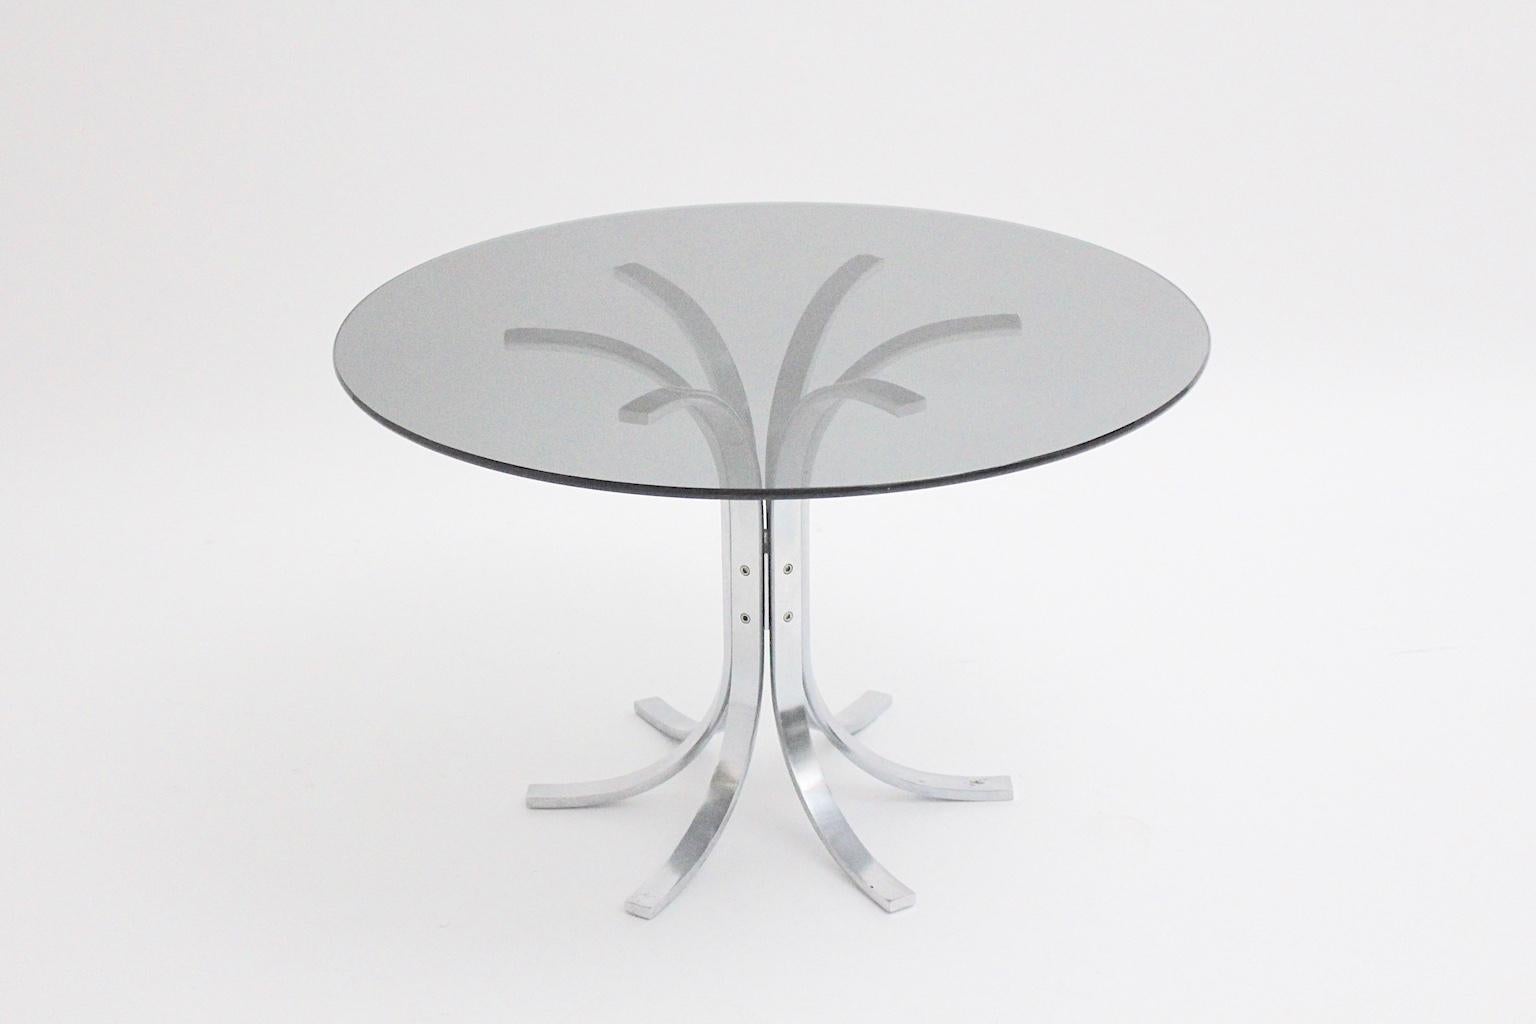 A Space Age chromed-plated metal coffee table by Merrow Associates, attributed circa 1970, which shows a smoked glass plate with approximate 80 cm diameter.
Furthermore the chrome-plated metal base shows 6 legs and an approximate height of 50.5